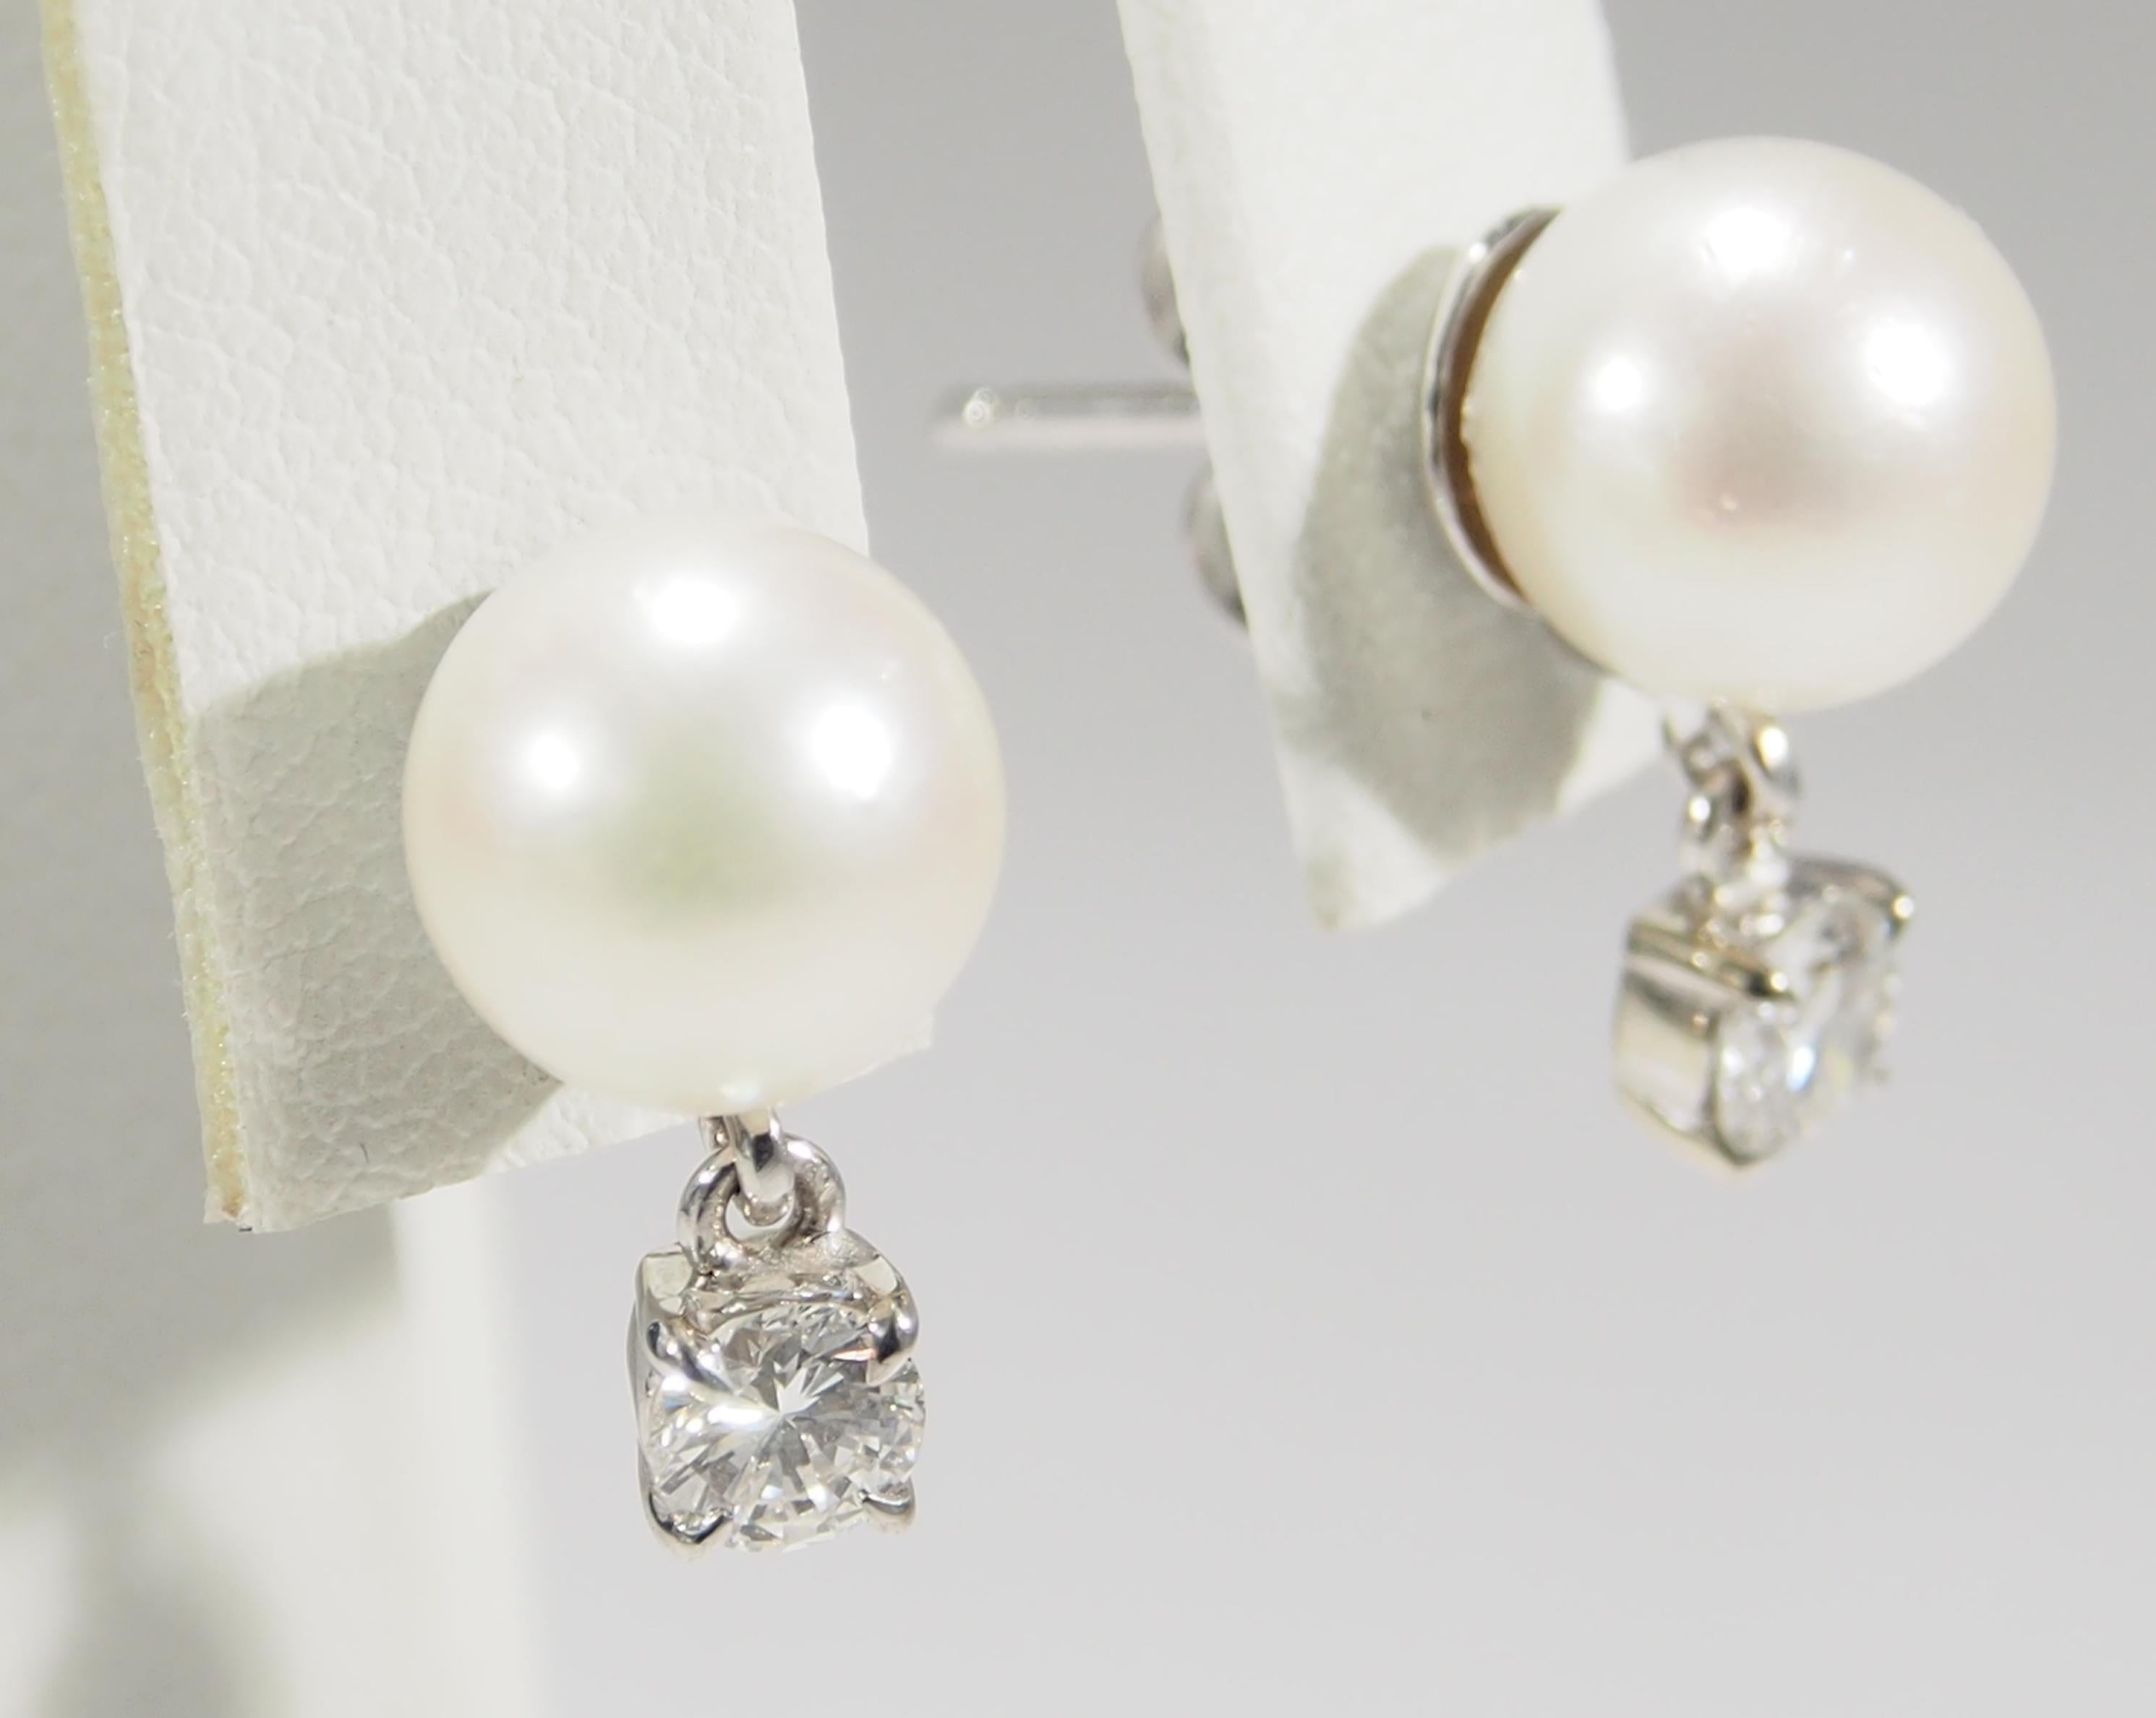 These are a classic pair of 18K White Gold Pearl Stud Earrings. The Pearls measure 8.5mm and are enhanced by (2) Round Brilliant Cut Diamonds, approximately 0.55ctw, G-H in Color, VS-SI in Clarity, Dangling from the lustrous Pearls. The Earrings are